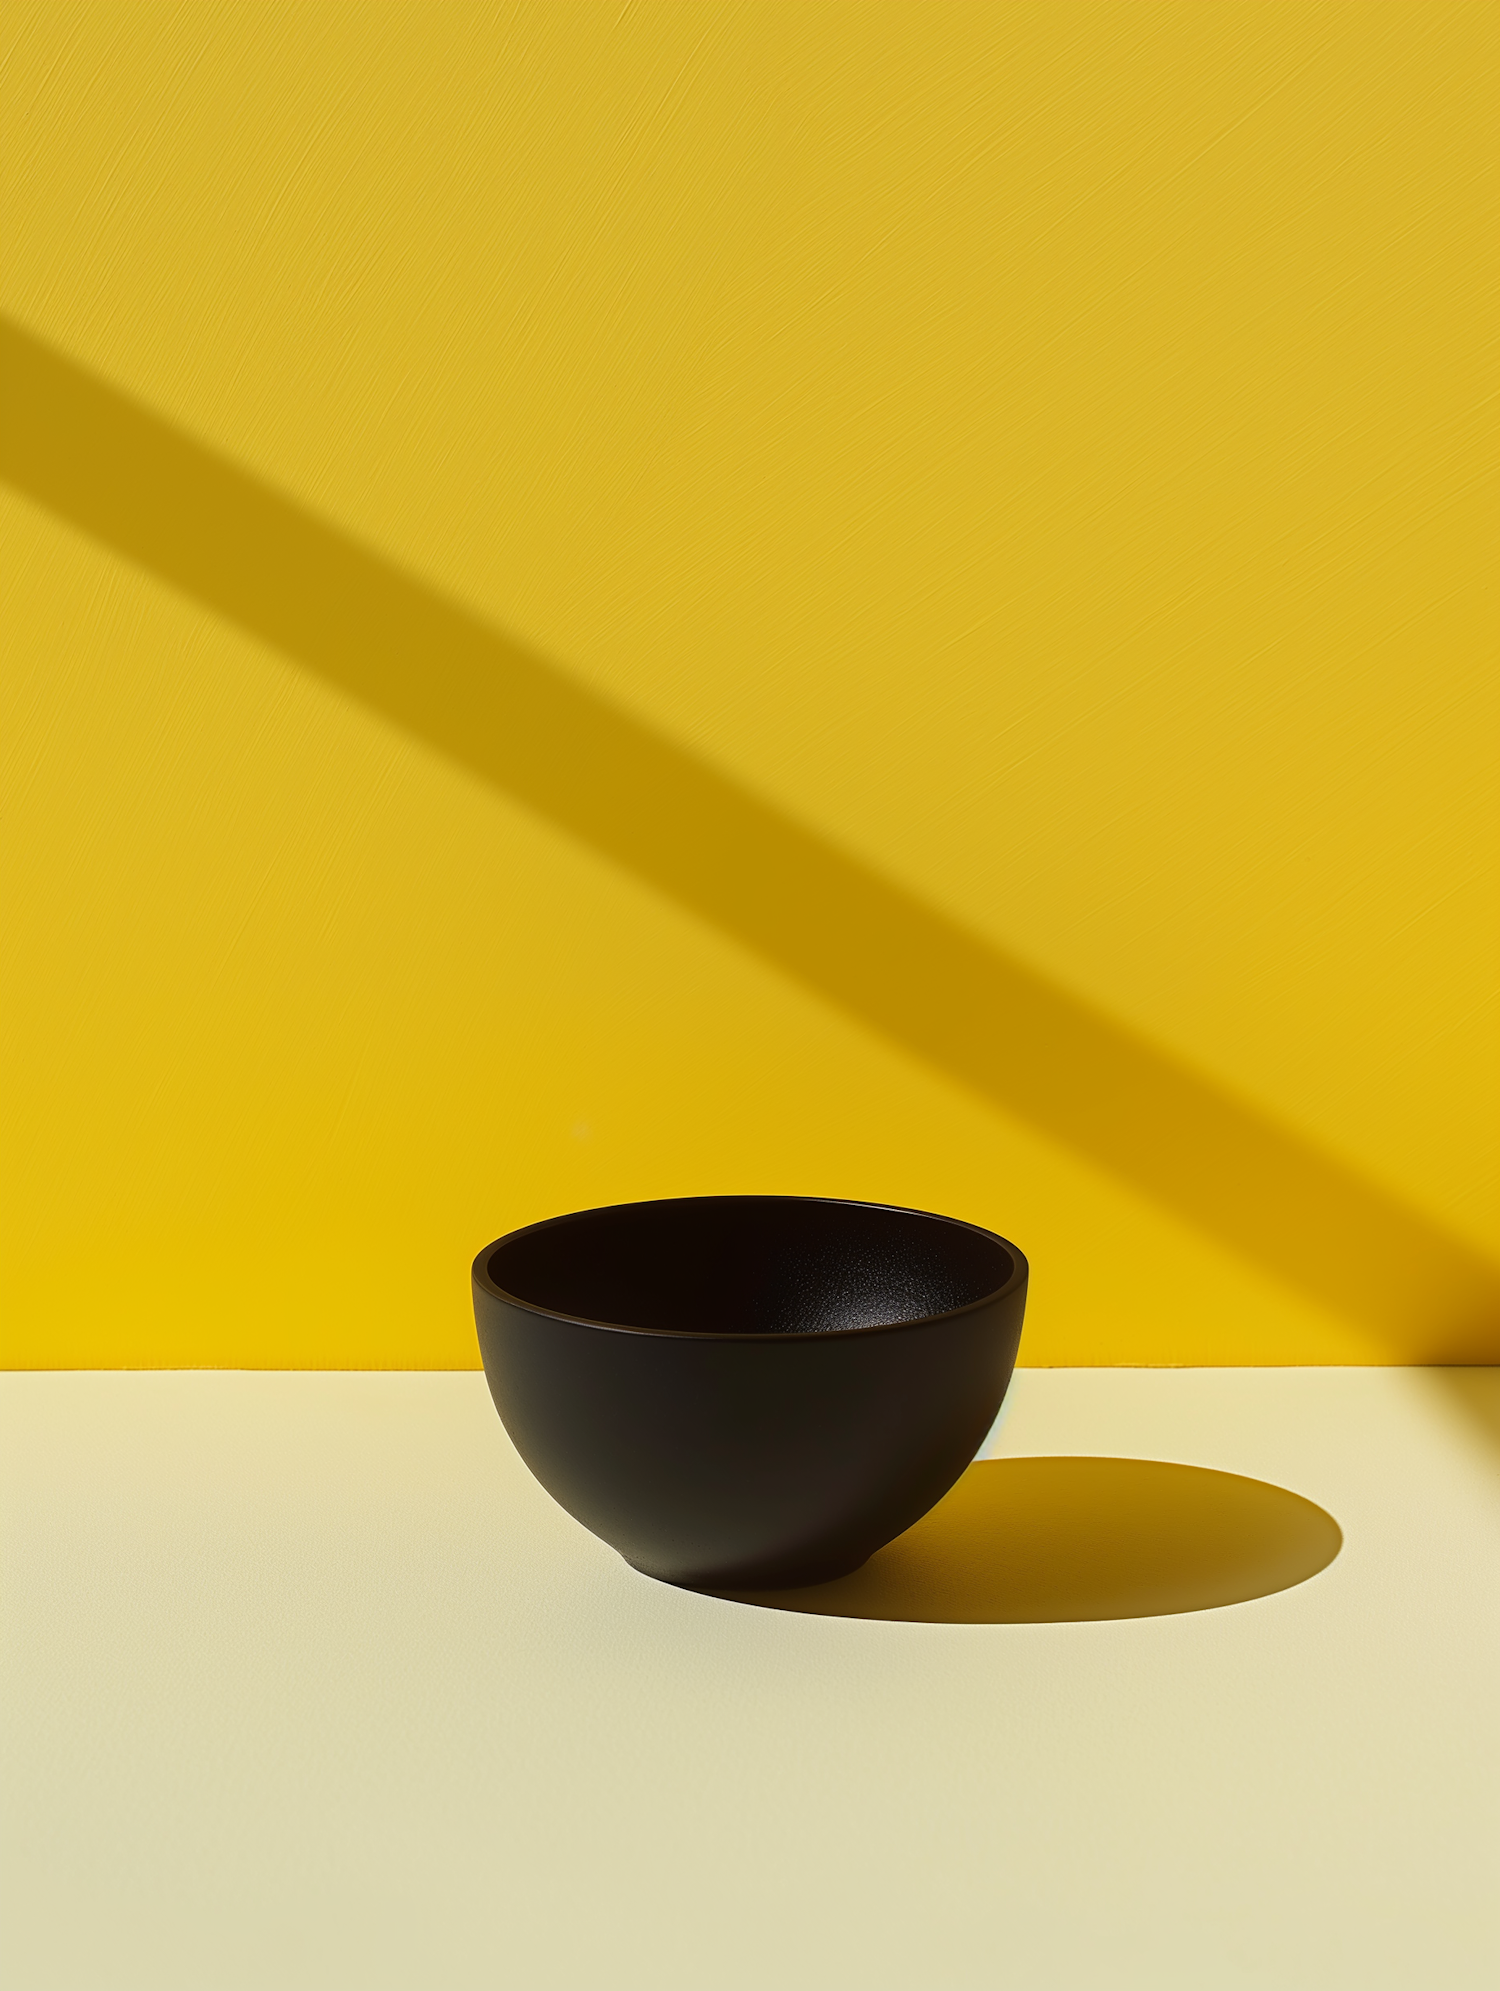 Black Bowl Against Yellow Background